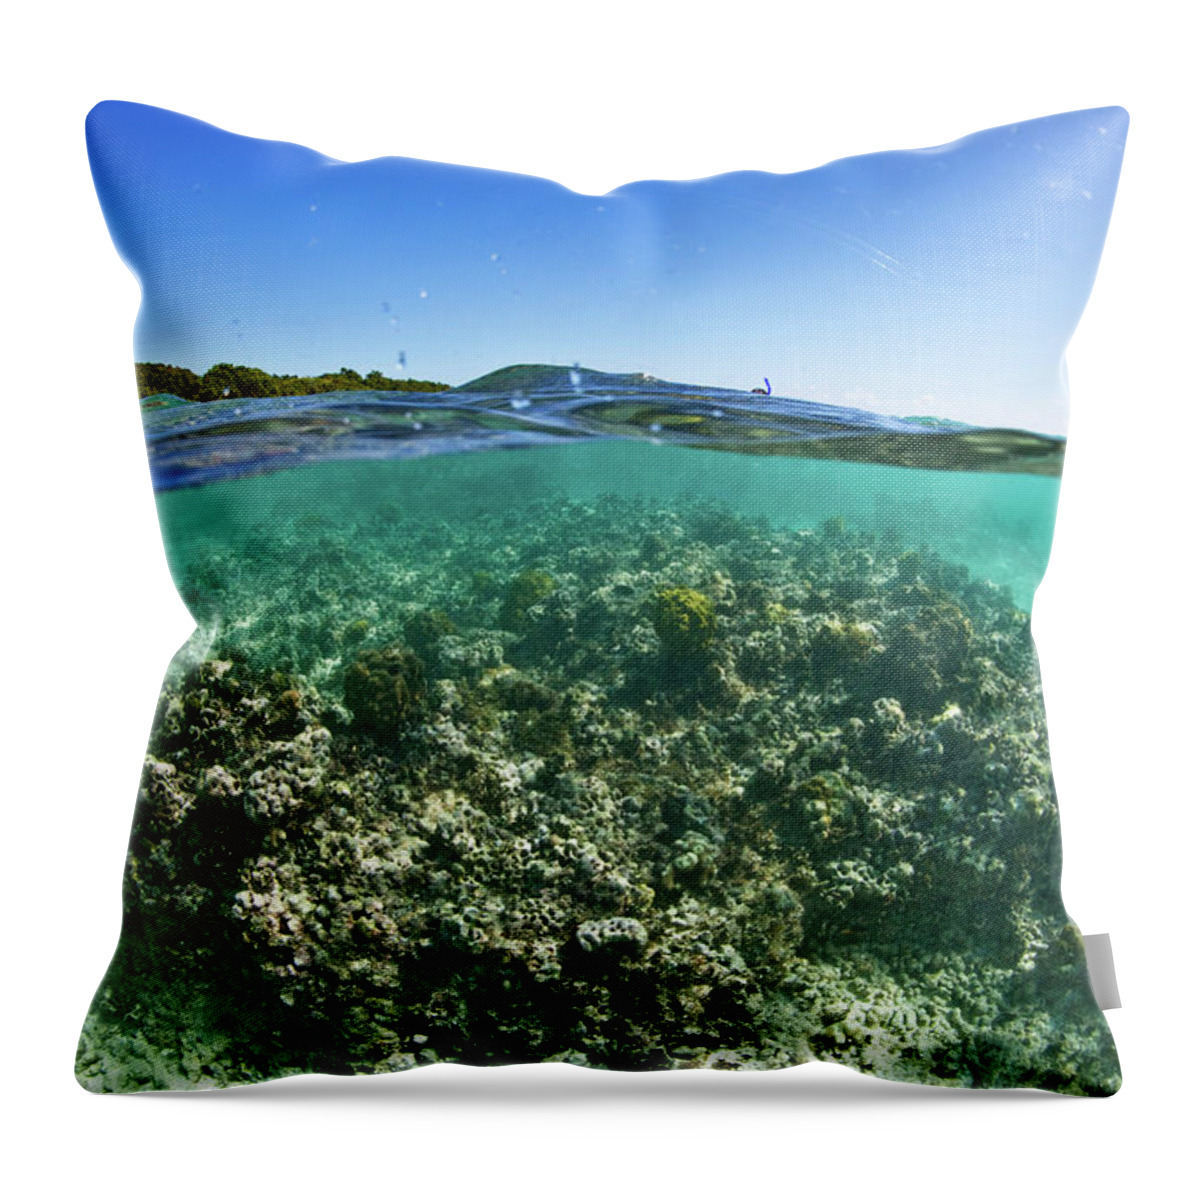 Photography Throw Pillow featuring the photograph Coral Reef In Culebra Island, Puerto by Panoramic Images